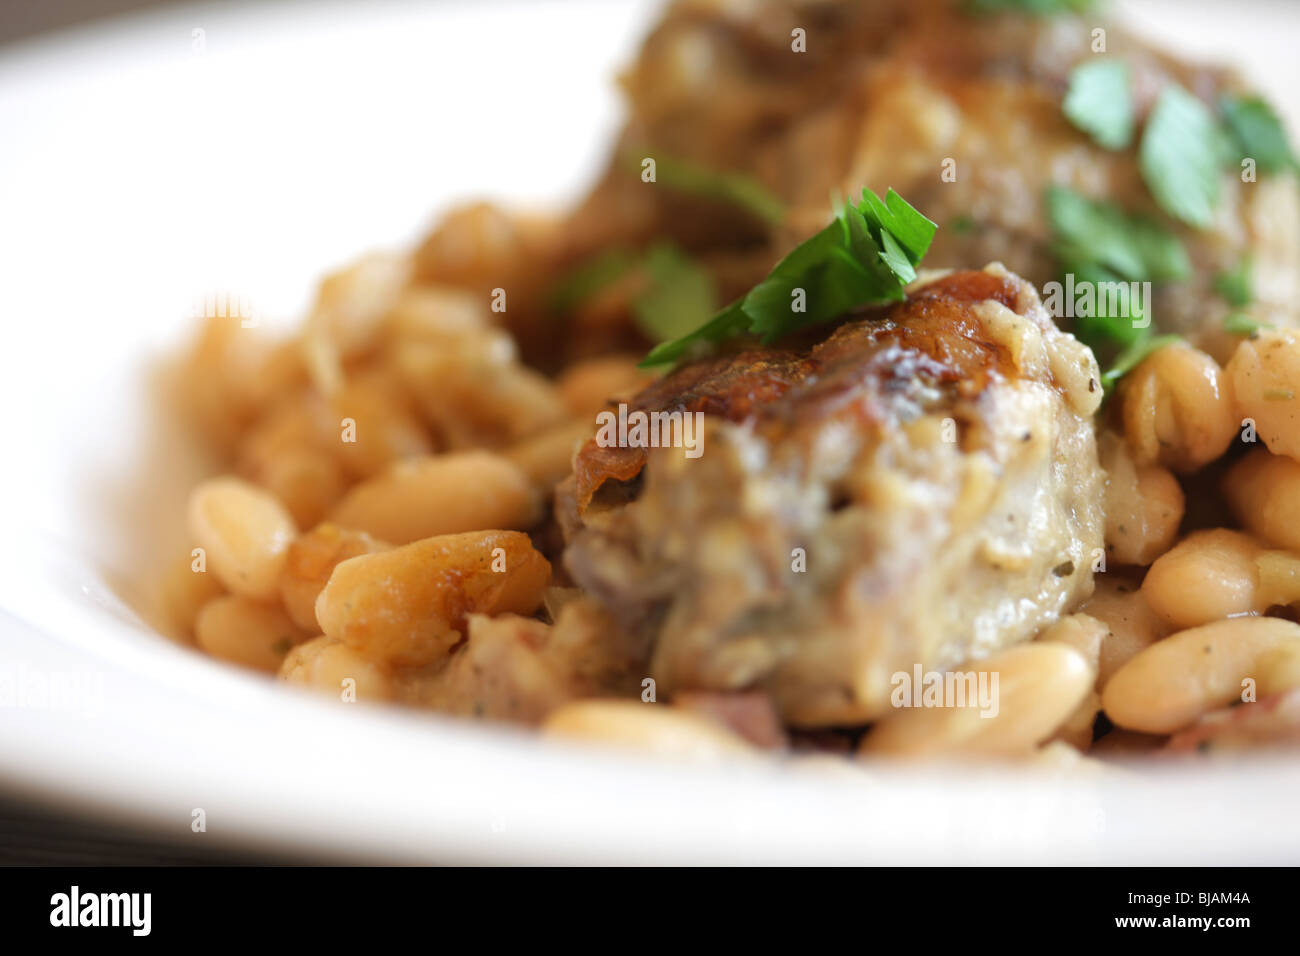 Authentic French Style Rich Slow Cooked Pork Cassoulet Casserole With White Beans And No People Stock Photo